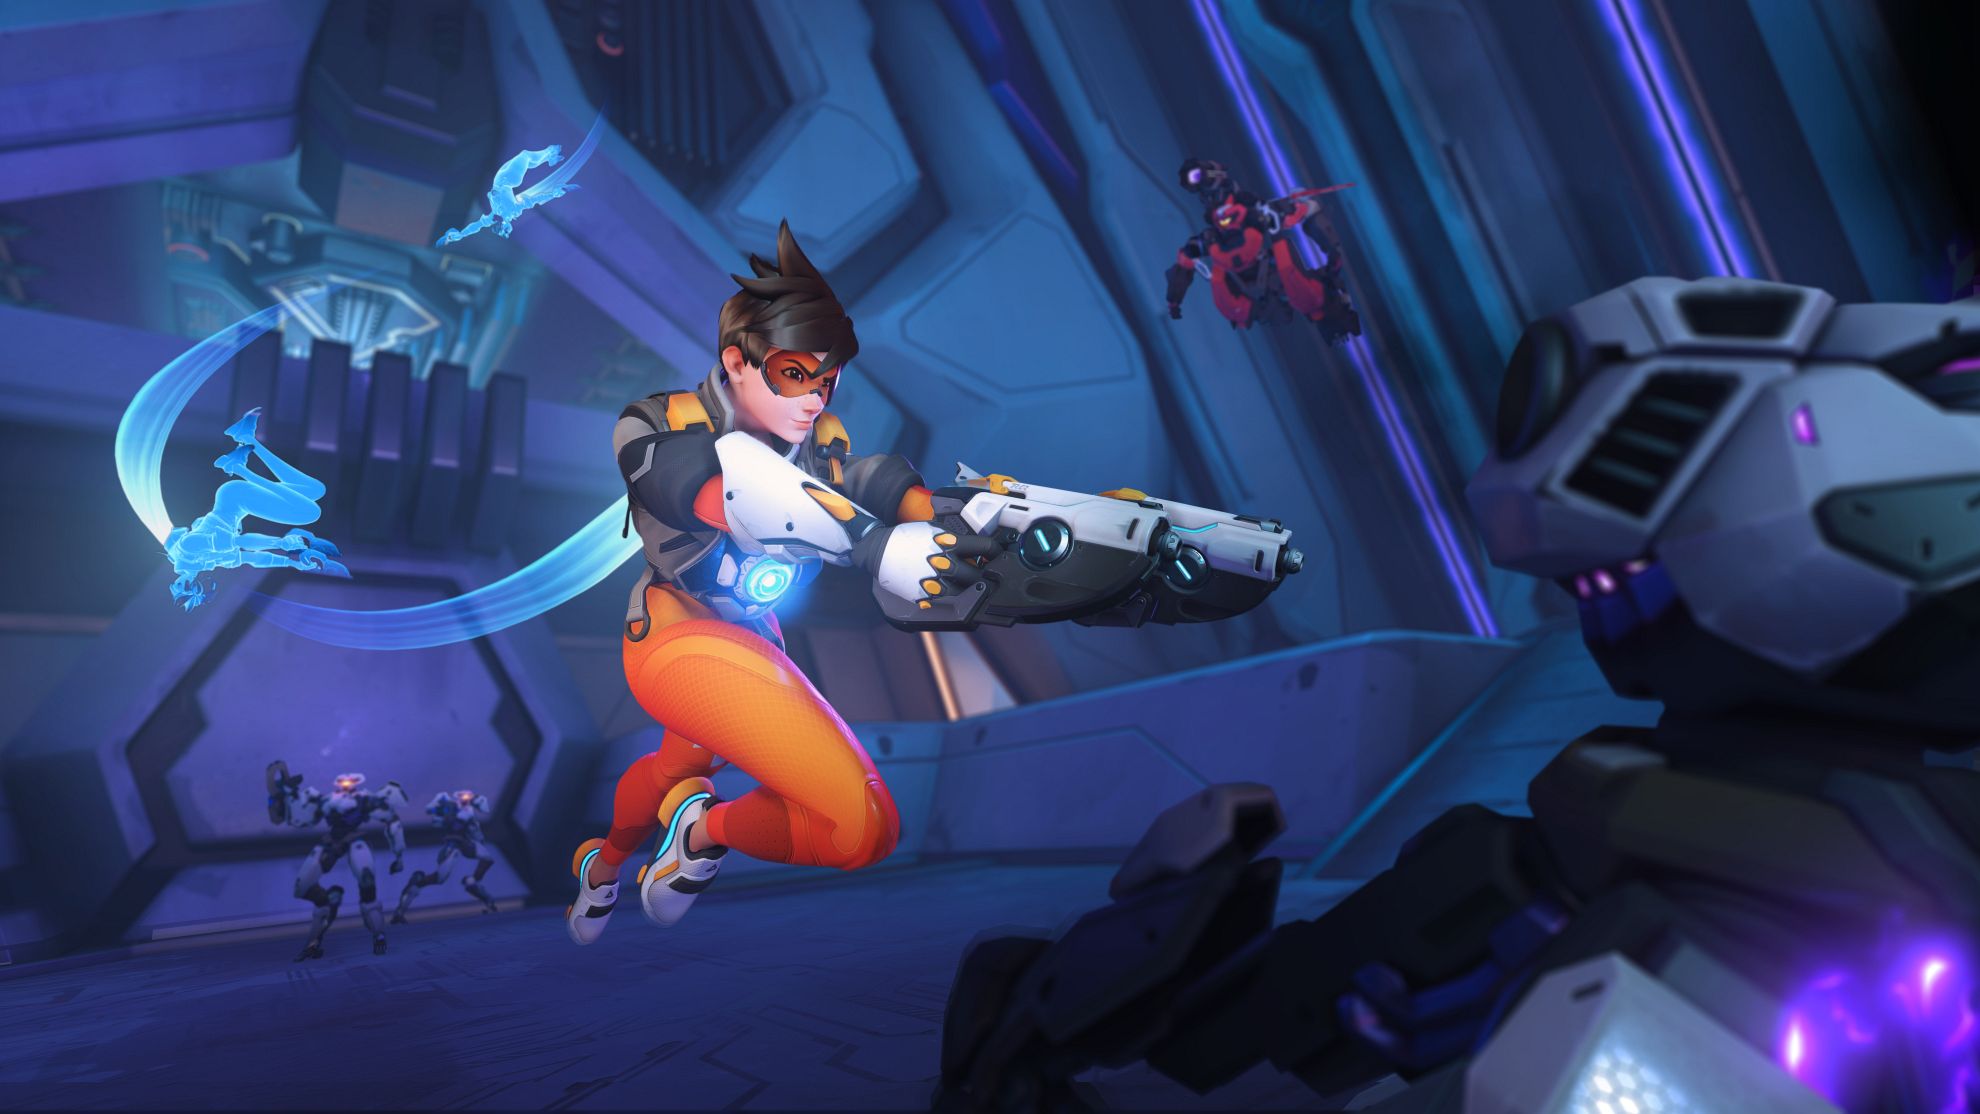 Image for Overwatch 2 announced at BlizzCon 2019, all cosmetics and progress will carry forward